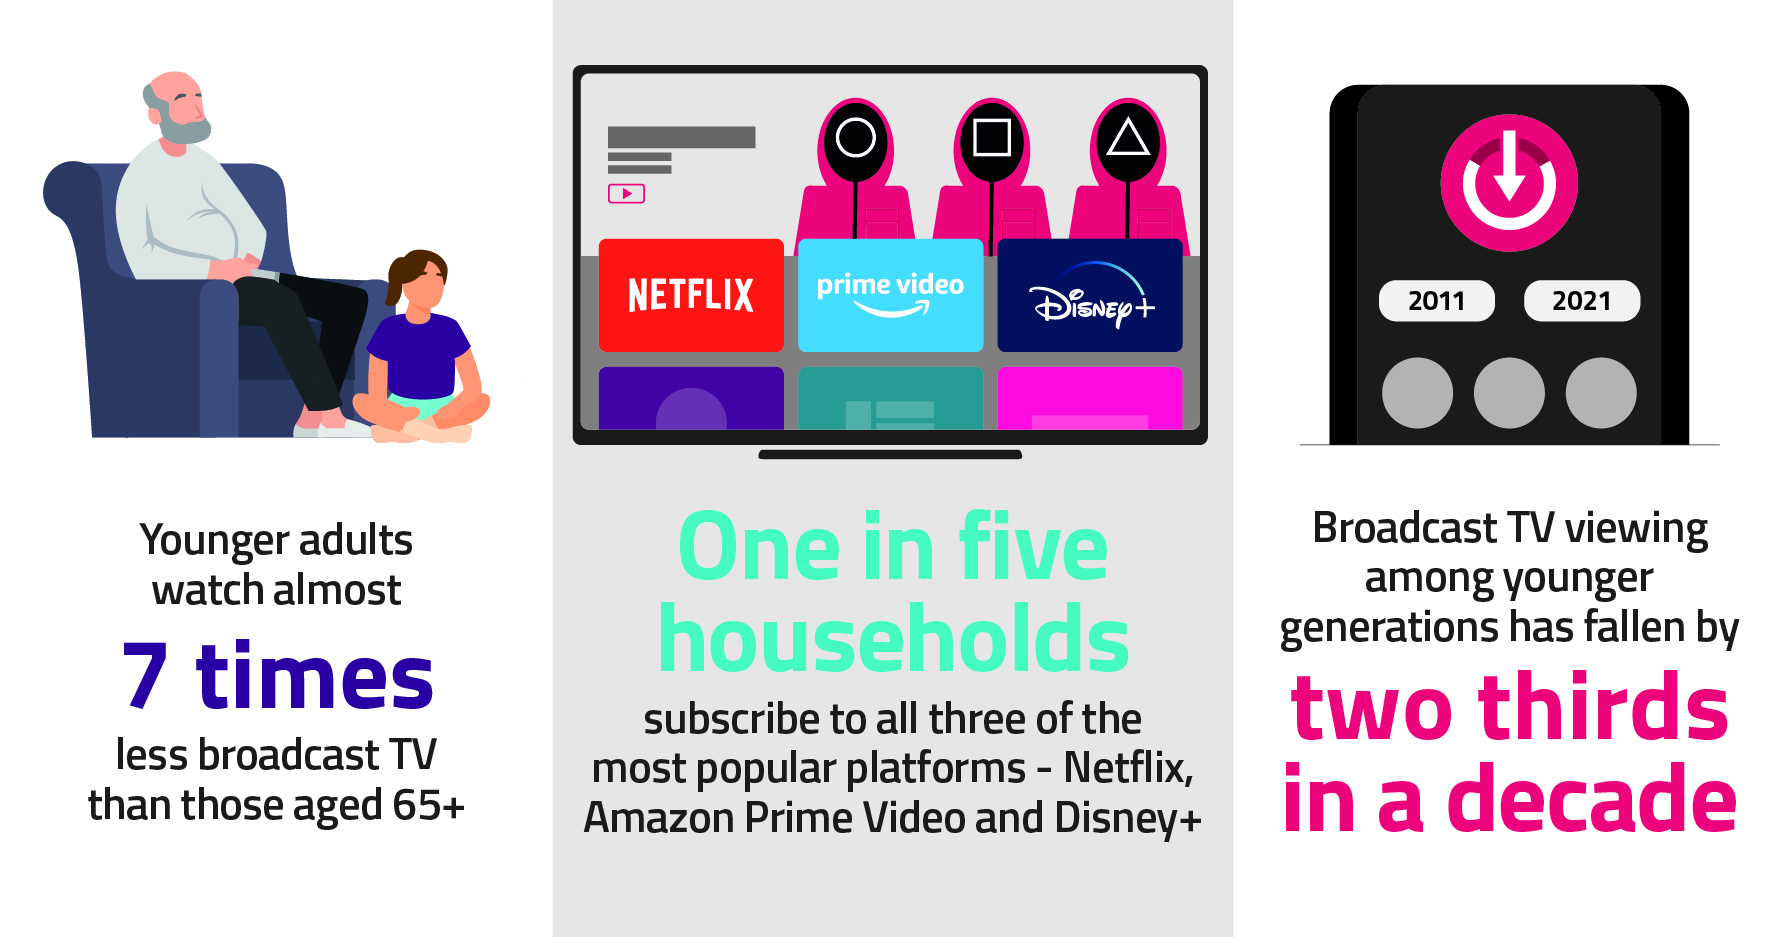 Overview of our findings: Younger adults watch almost 7 times less broadcast TV than those aged 65+. One in five households subscribe to all three of the most popular platforms - Netflix, Amazon Prime Video and Disney+. Broadcast TV viewing among younger generations has fallen by two thirds in a decade.